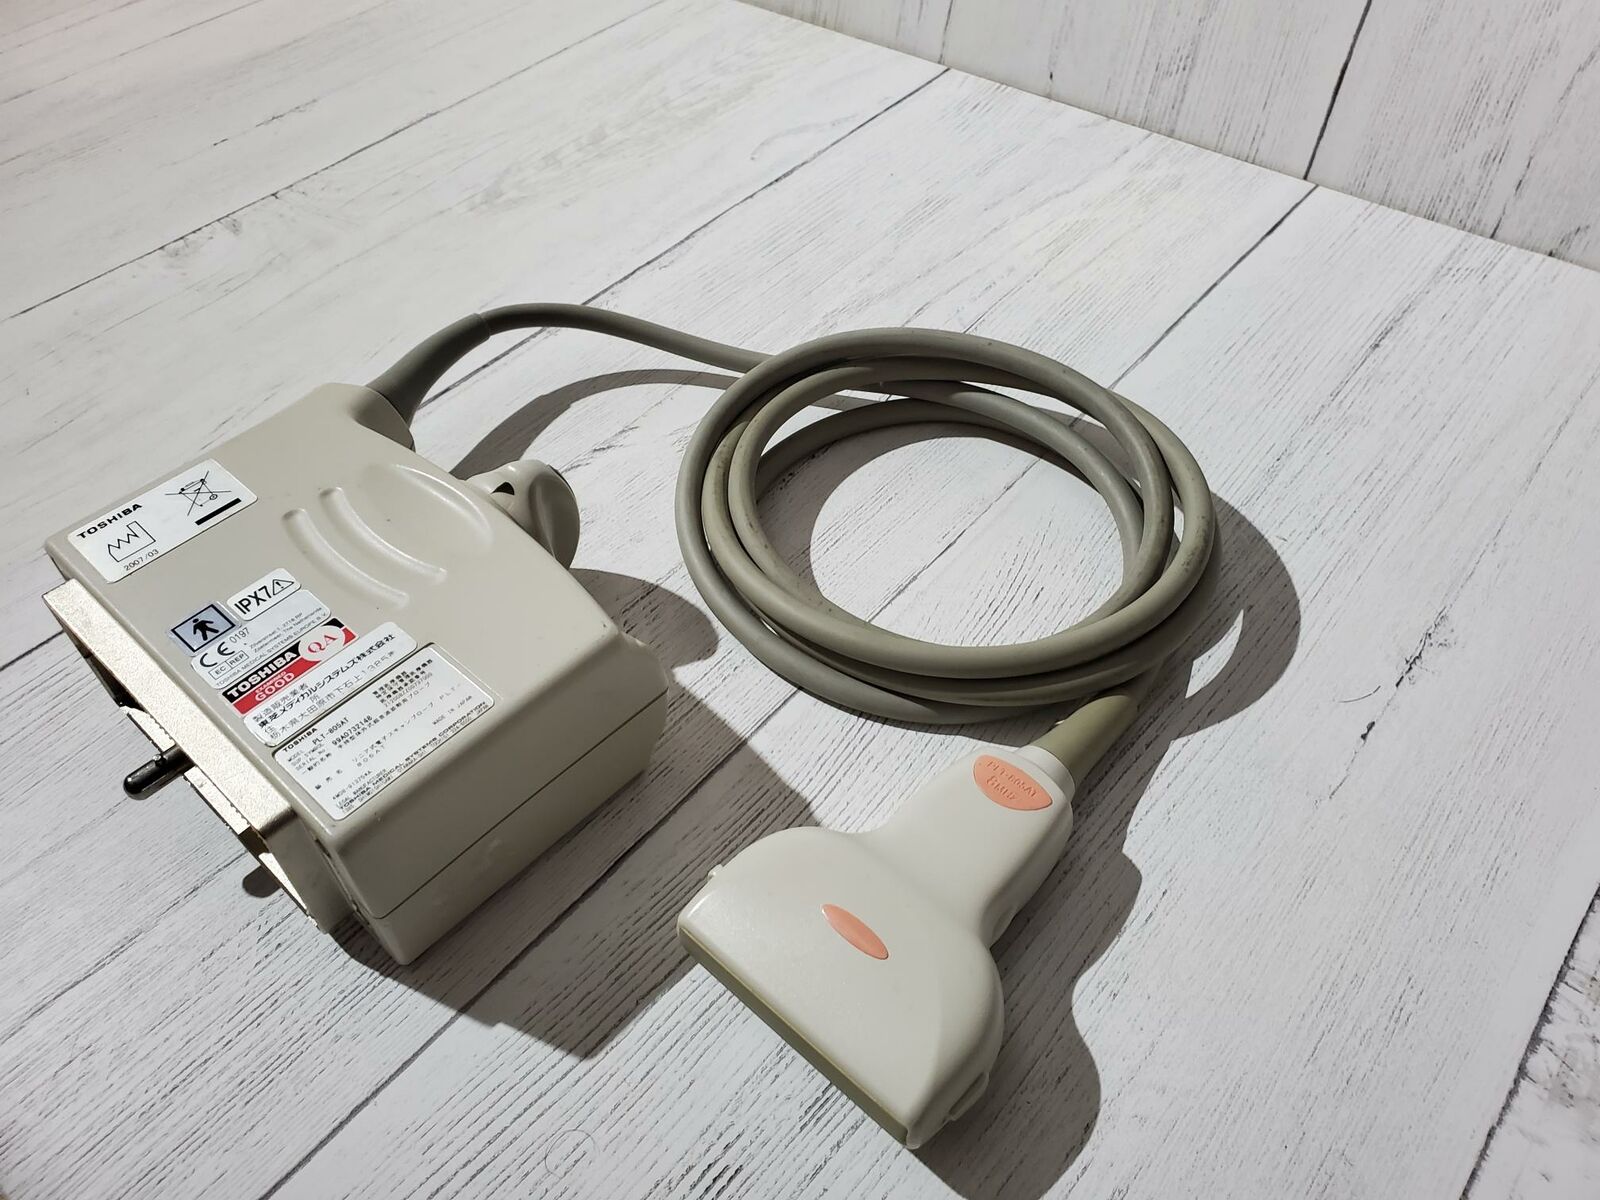 Ultrasound Probe TOSHIBA PLT-805AT Manufactured 2007 DIAGNOSTIC ULTRASOUND MACHINES FOR SALE